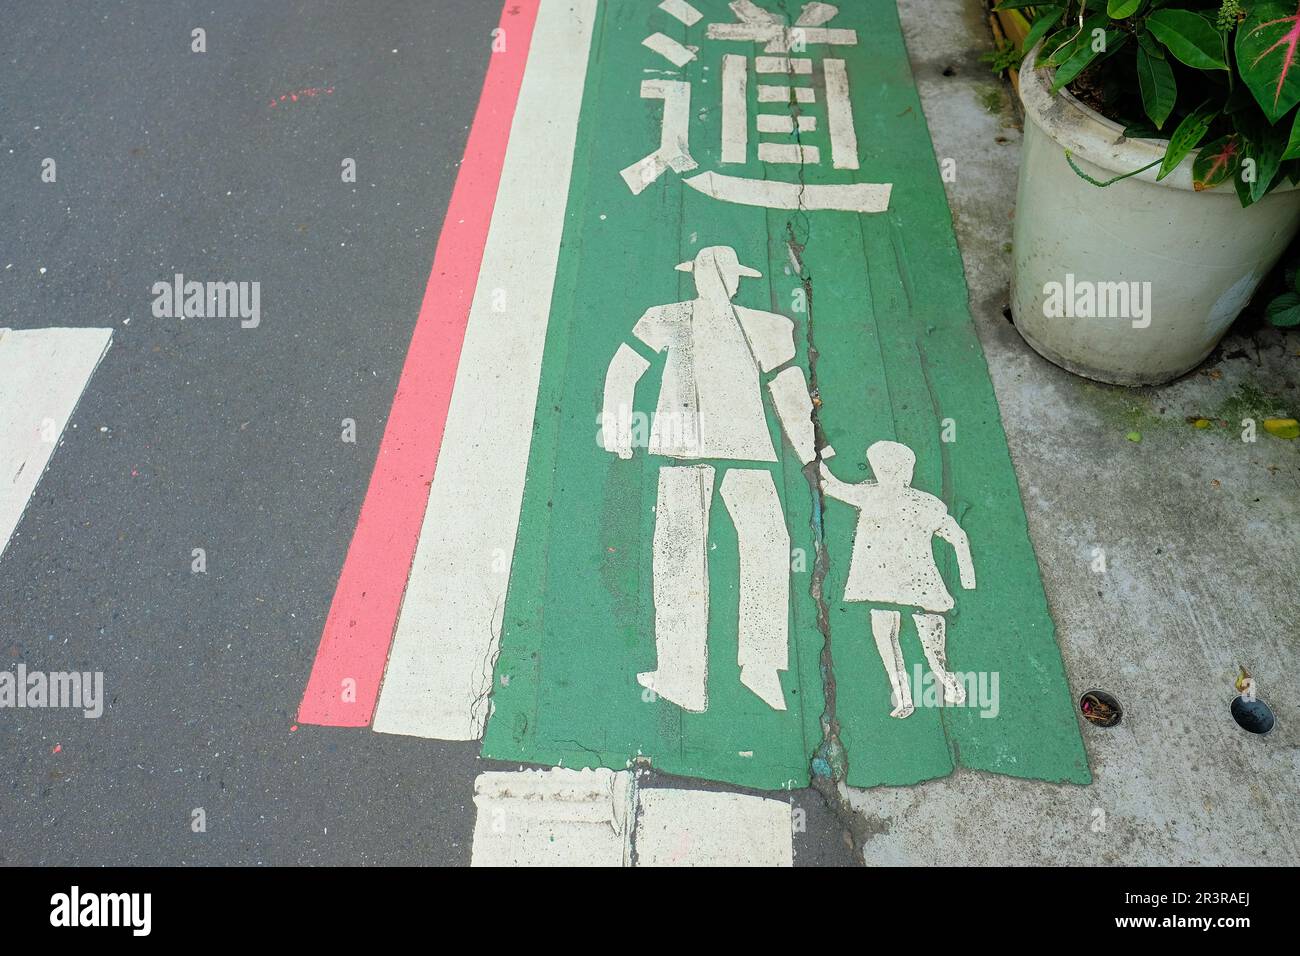 White silhouette of man holding a child's hand on a designated green path on the street for pedestrians and pedestrian traffic; Taipei, Taiwan. Stock Photo